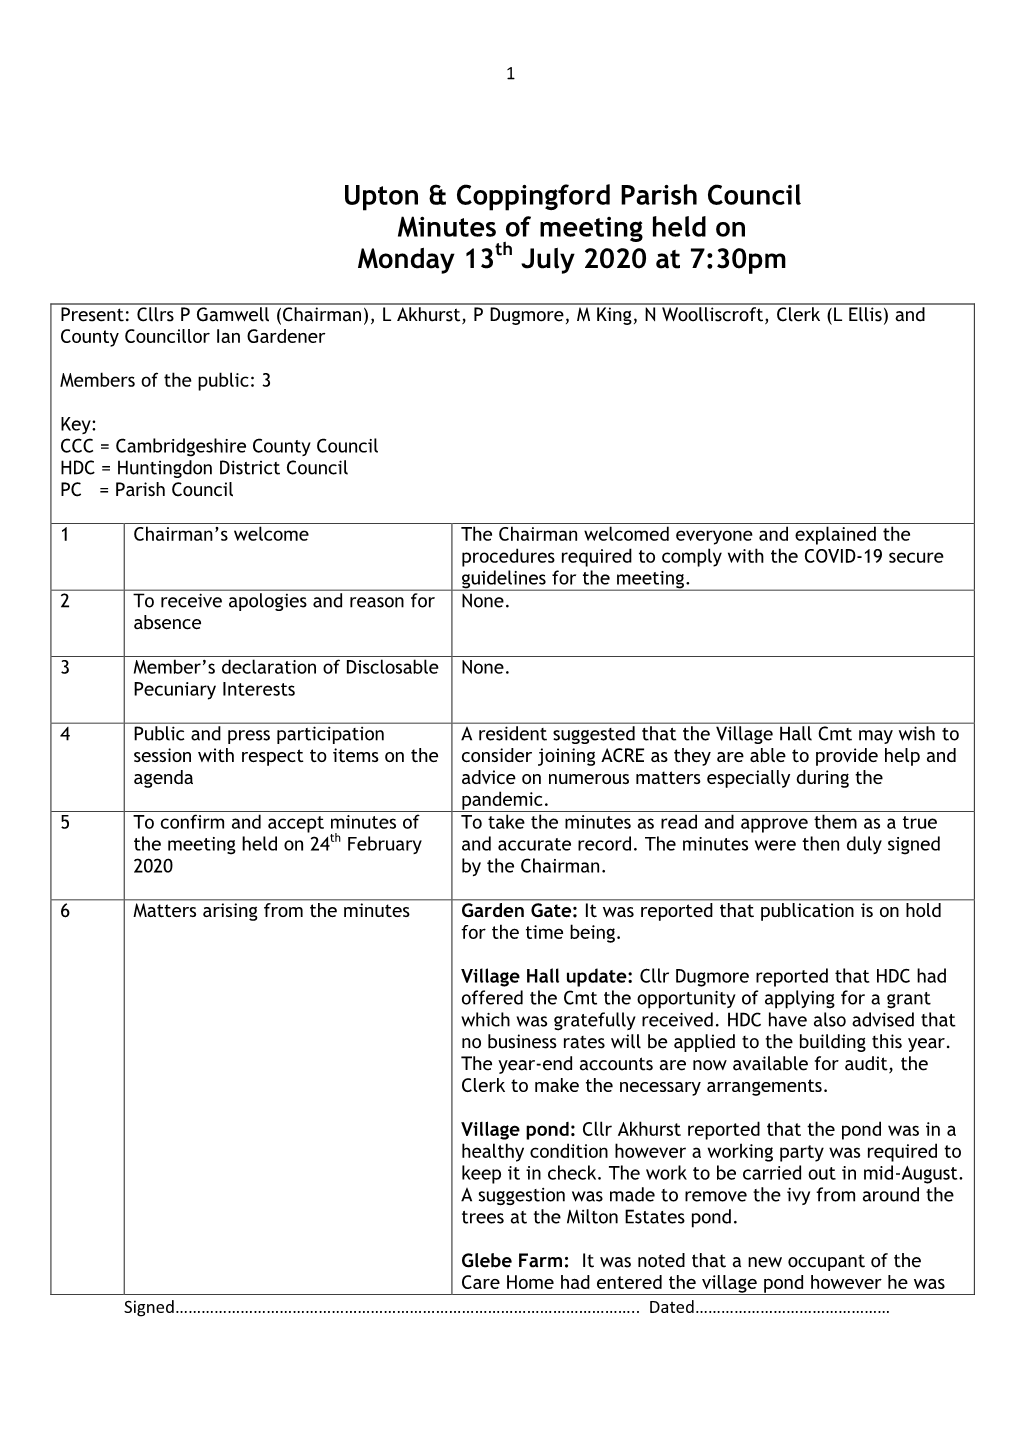 Upton & Coppingford Parish Council Minutes of Meeting Held on Monday